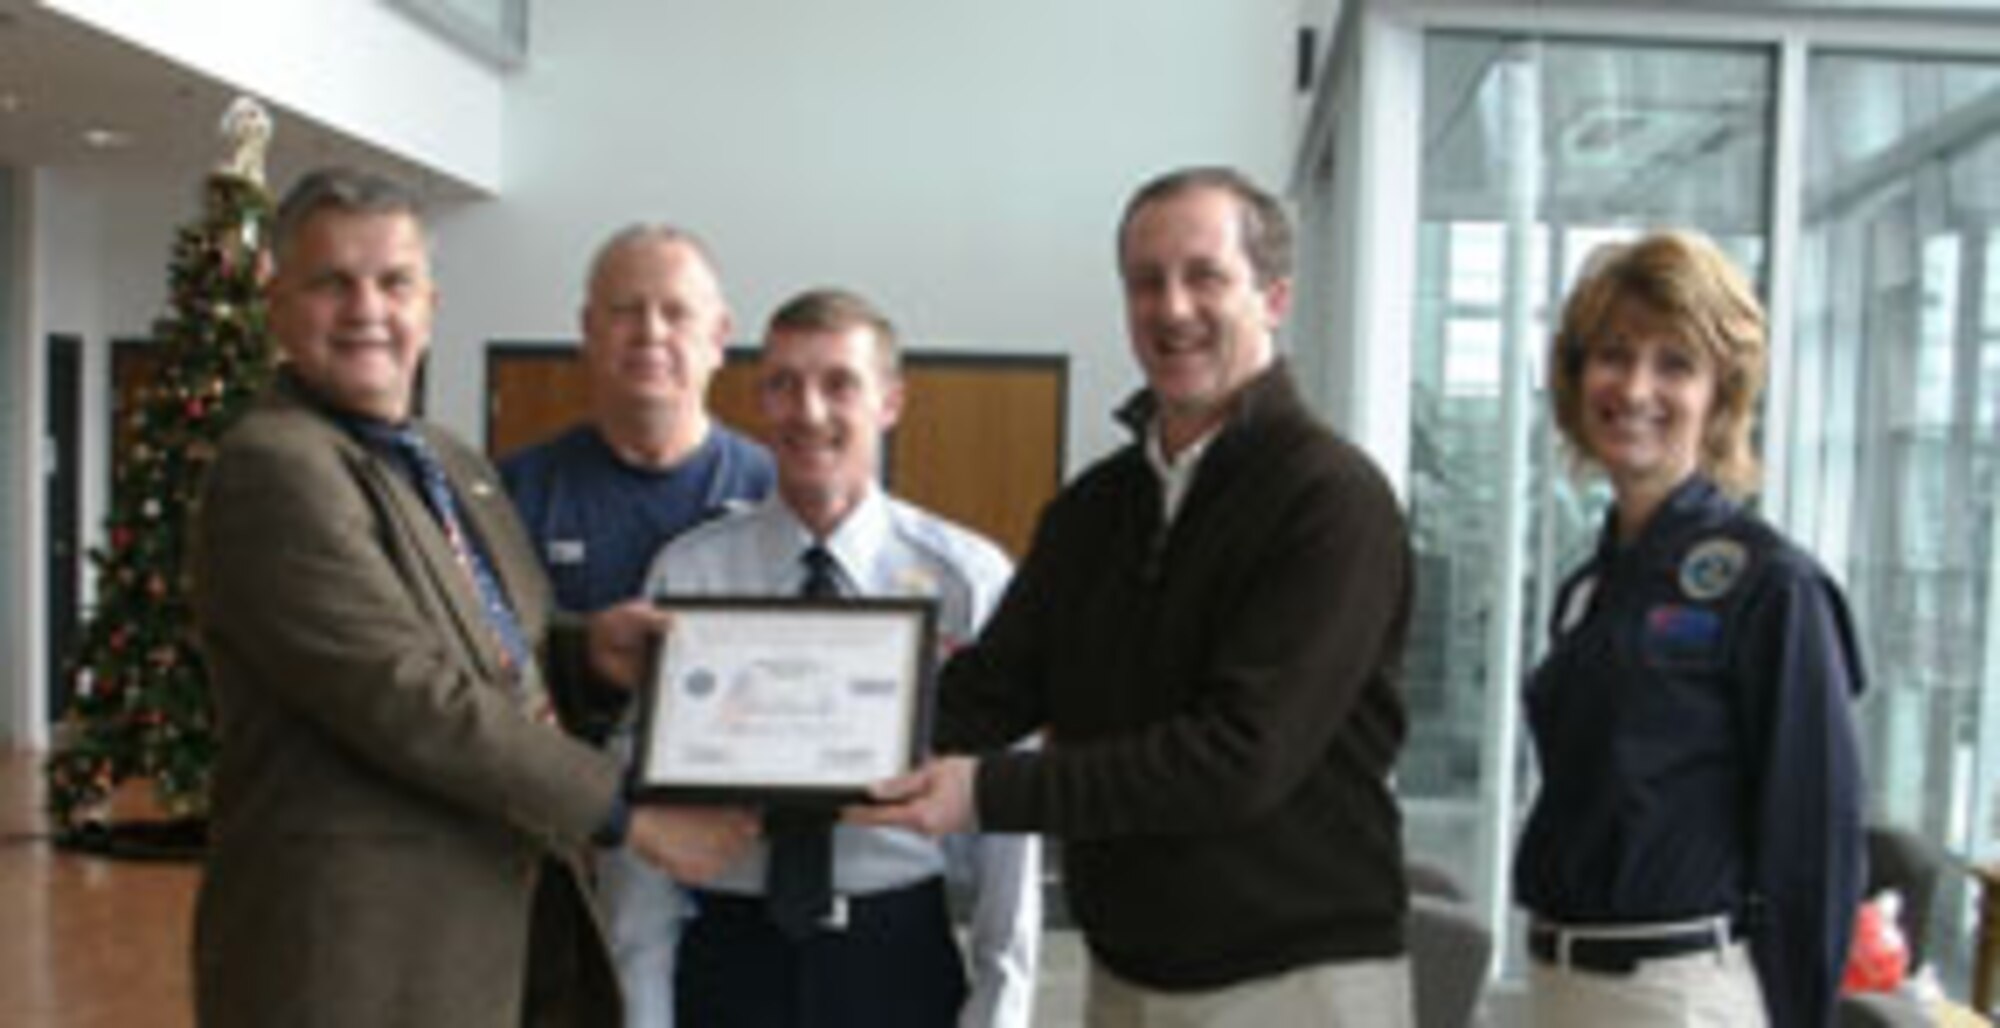 Bill Hines Jr., Co-Managing Director of Interprint, is present with the Patriot Award on behalf of Mr. Roland Morin.
Photo Left to Right: Earl Bonett, Tom Cornellier, Sr., MSgt Scott Trumble, Bill Hines, Jr., and Diane Swain. (ESGR courtesy photo)
